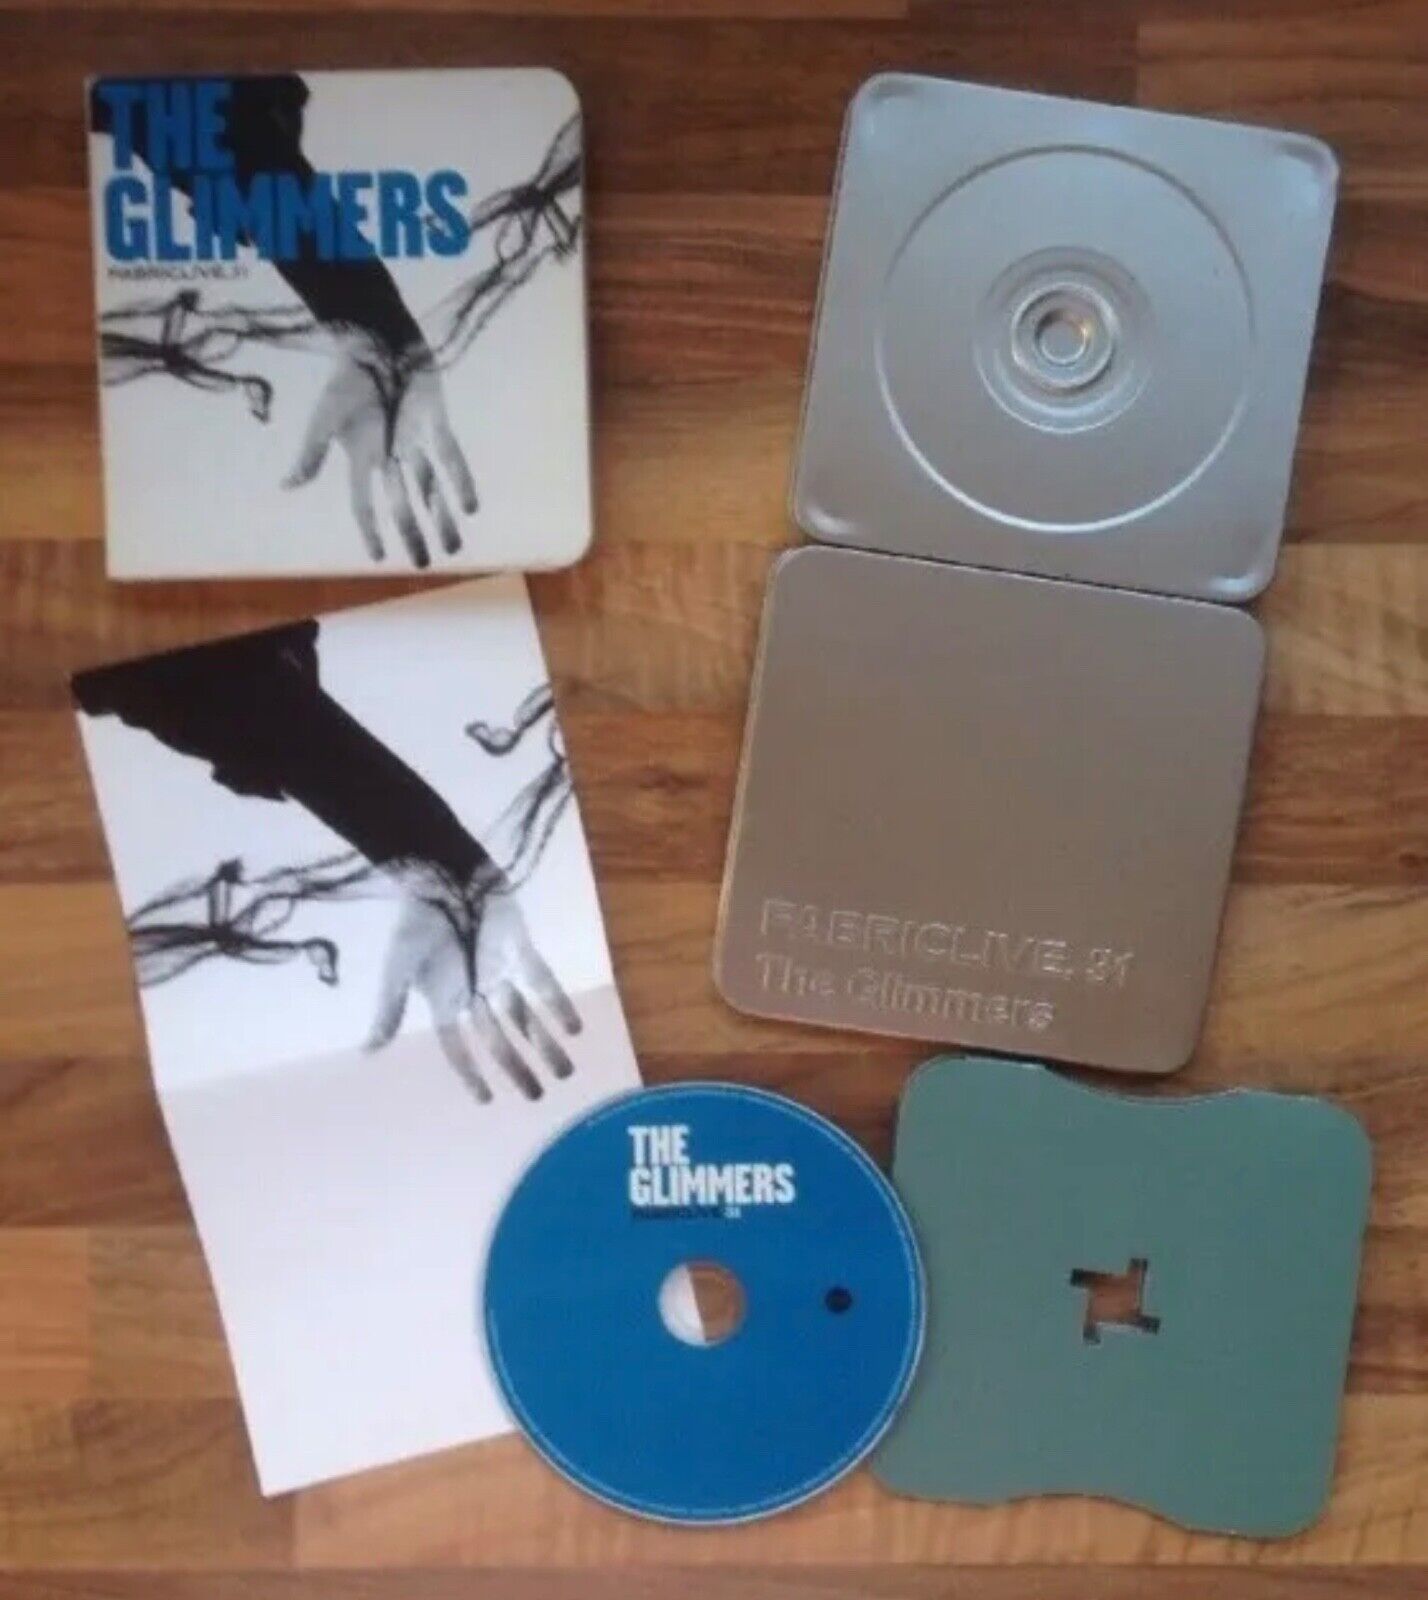 FABRIC LIVE 31 THE GLIMMERS Various Artists Mixed CD Disc, Steel Casing & Sleeve